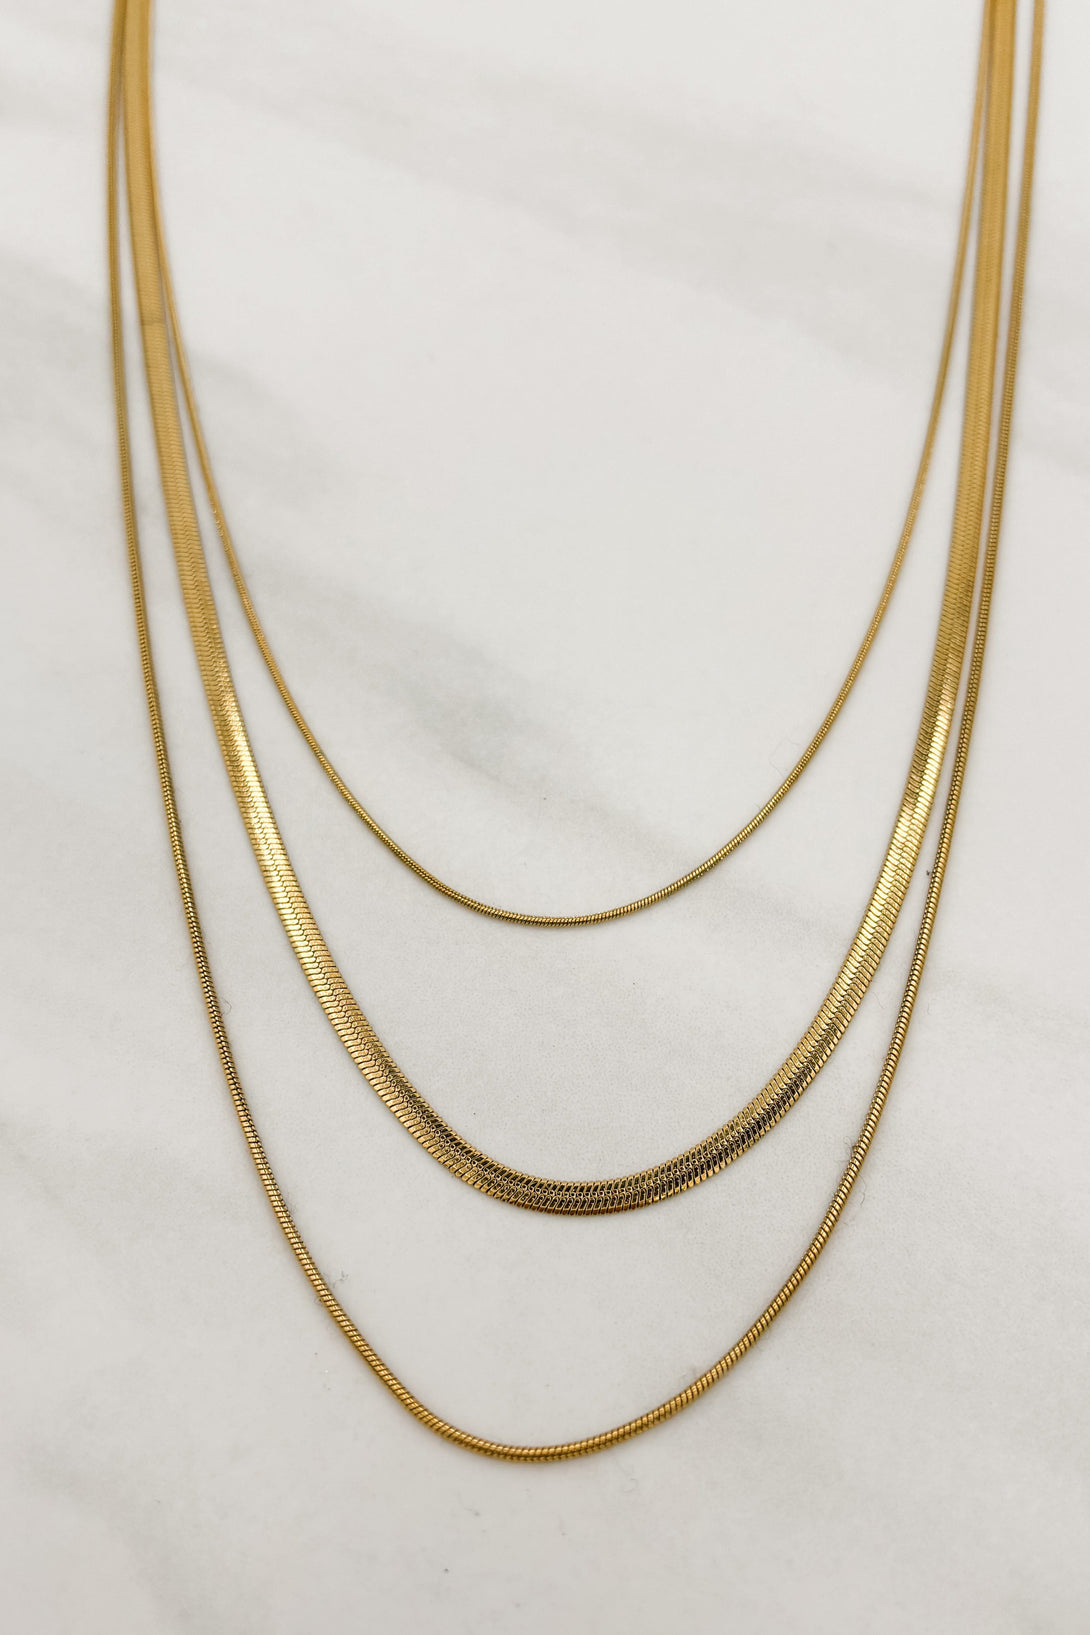 Three Strand Gold or Silver Plated Snake Chain Necklace